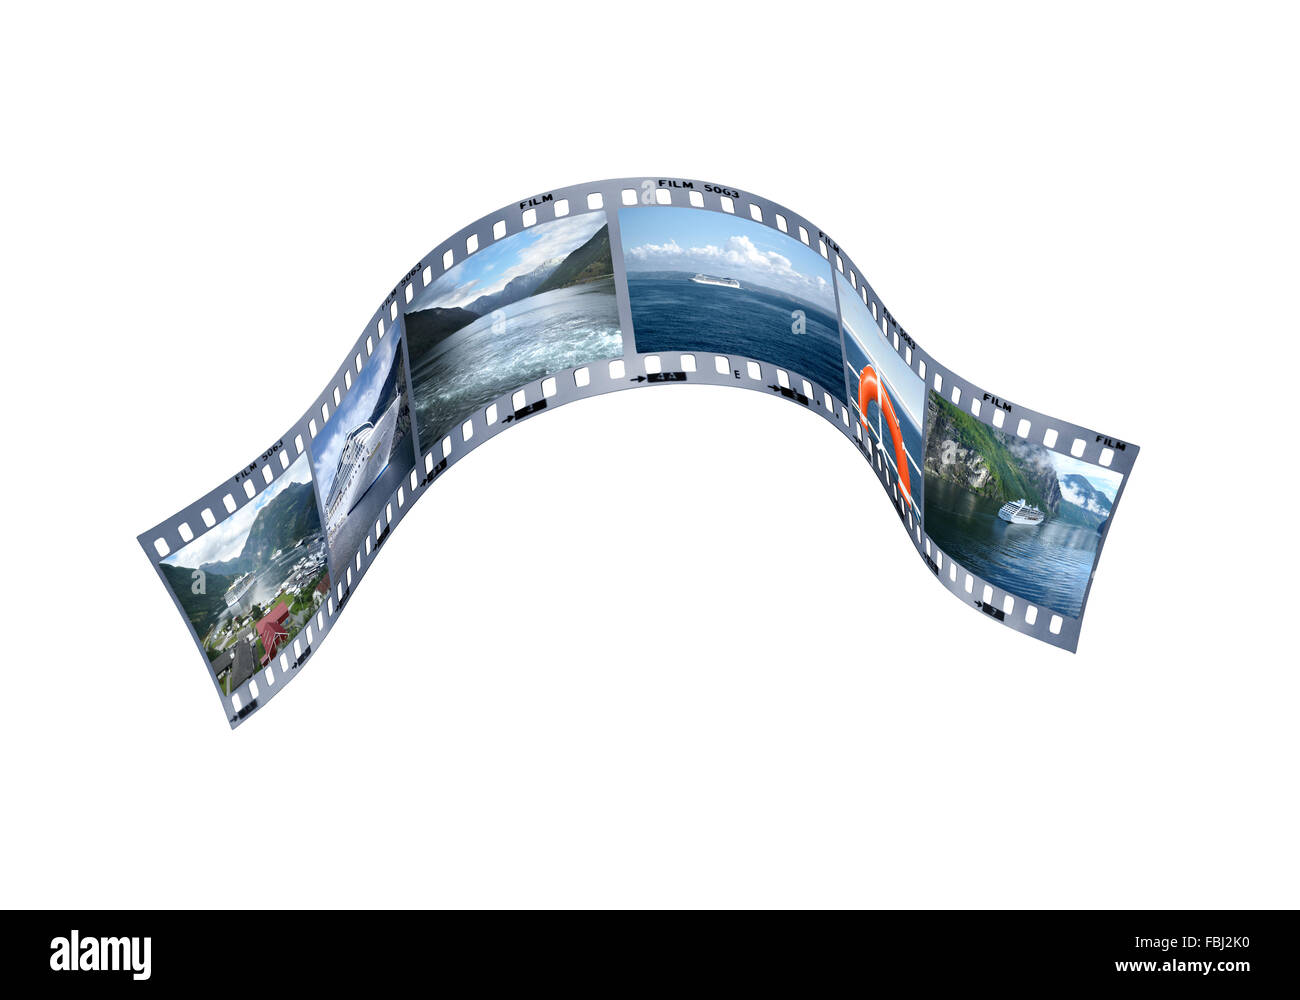 Tourism and travel concept. Film strip developing a cruise travel (photos by same author). Clipping path on film strips. Stock Photo